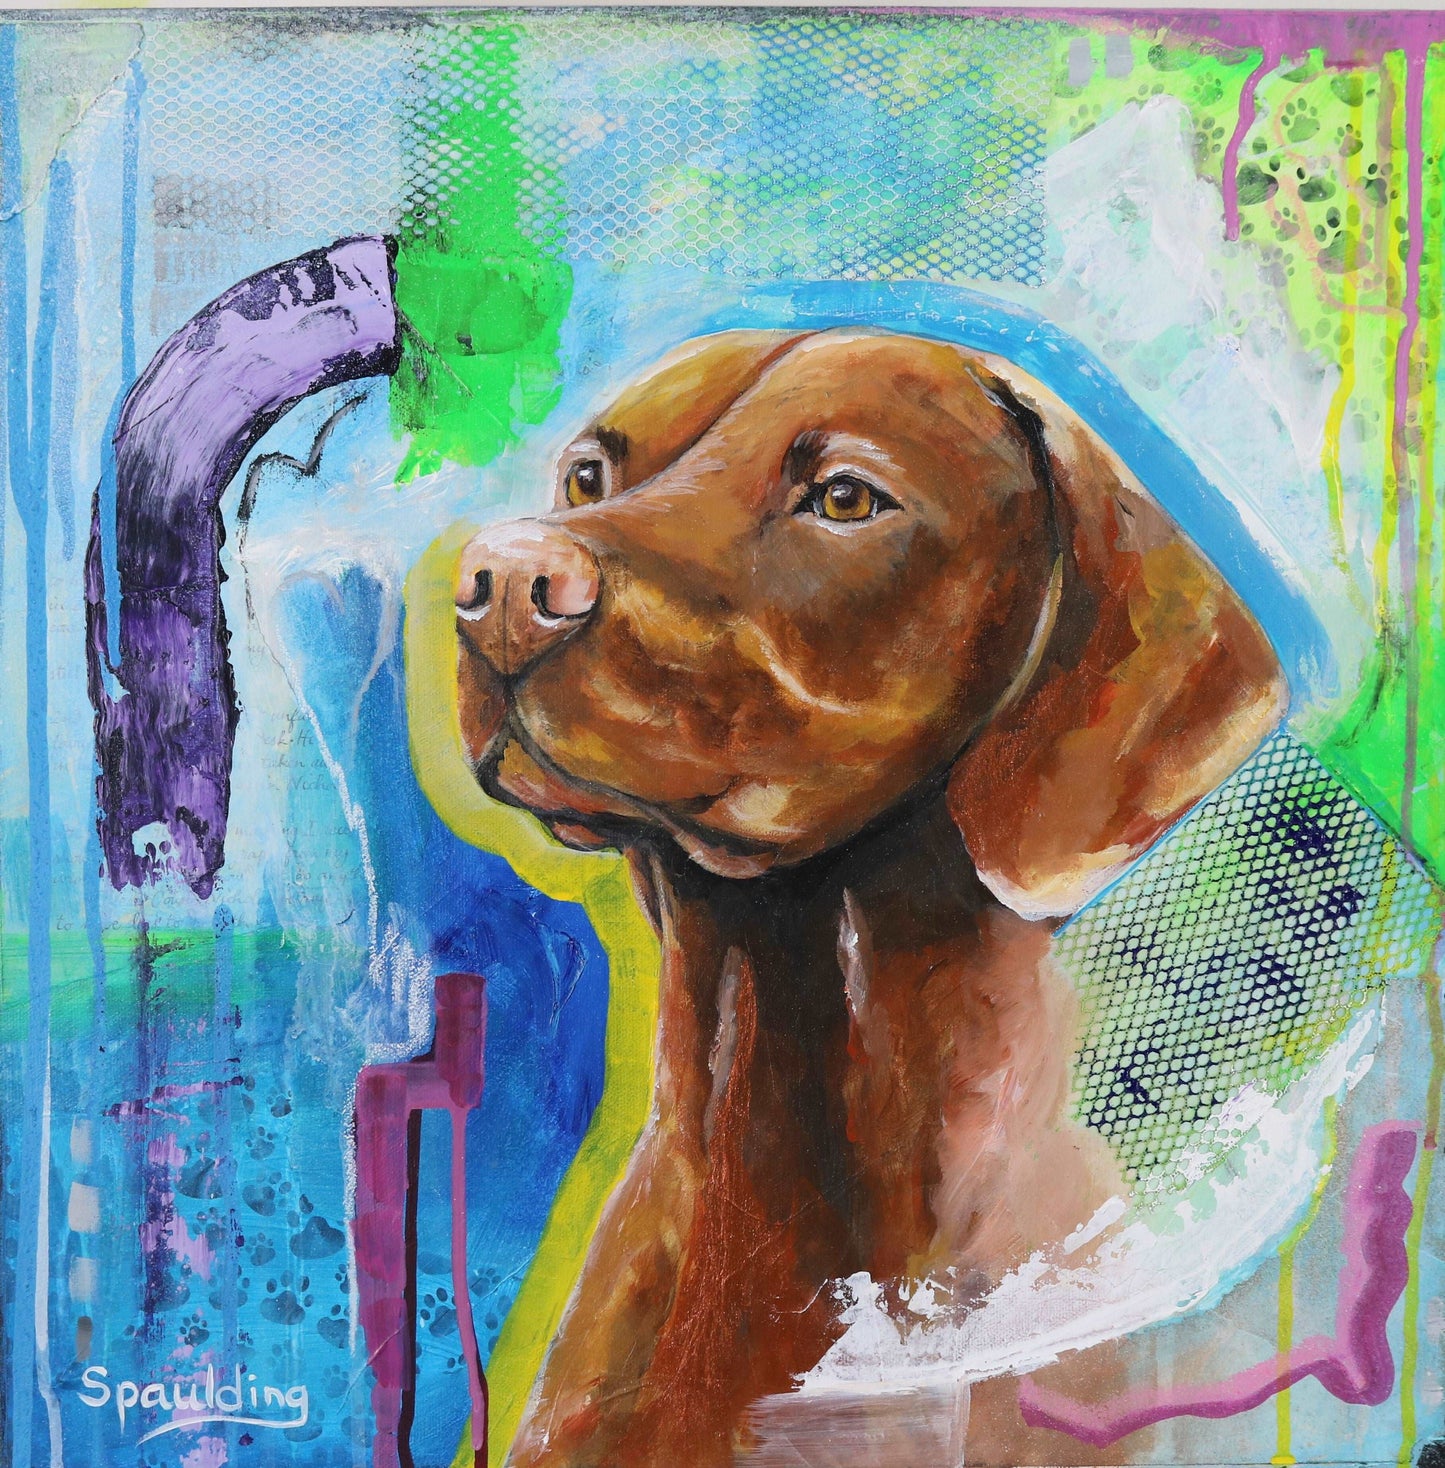 Painting of a brown dog with earnest eyes against a blue and green abstract background.